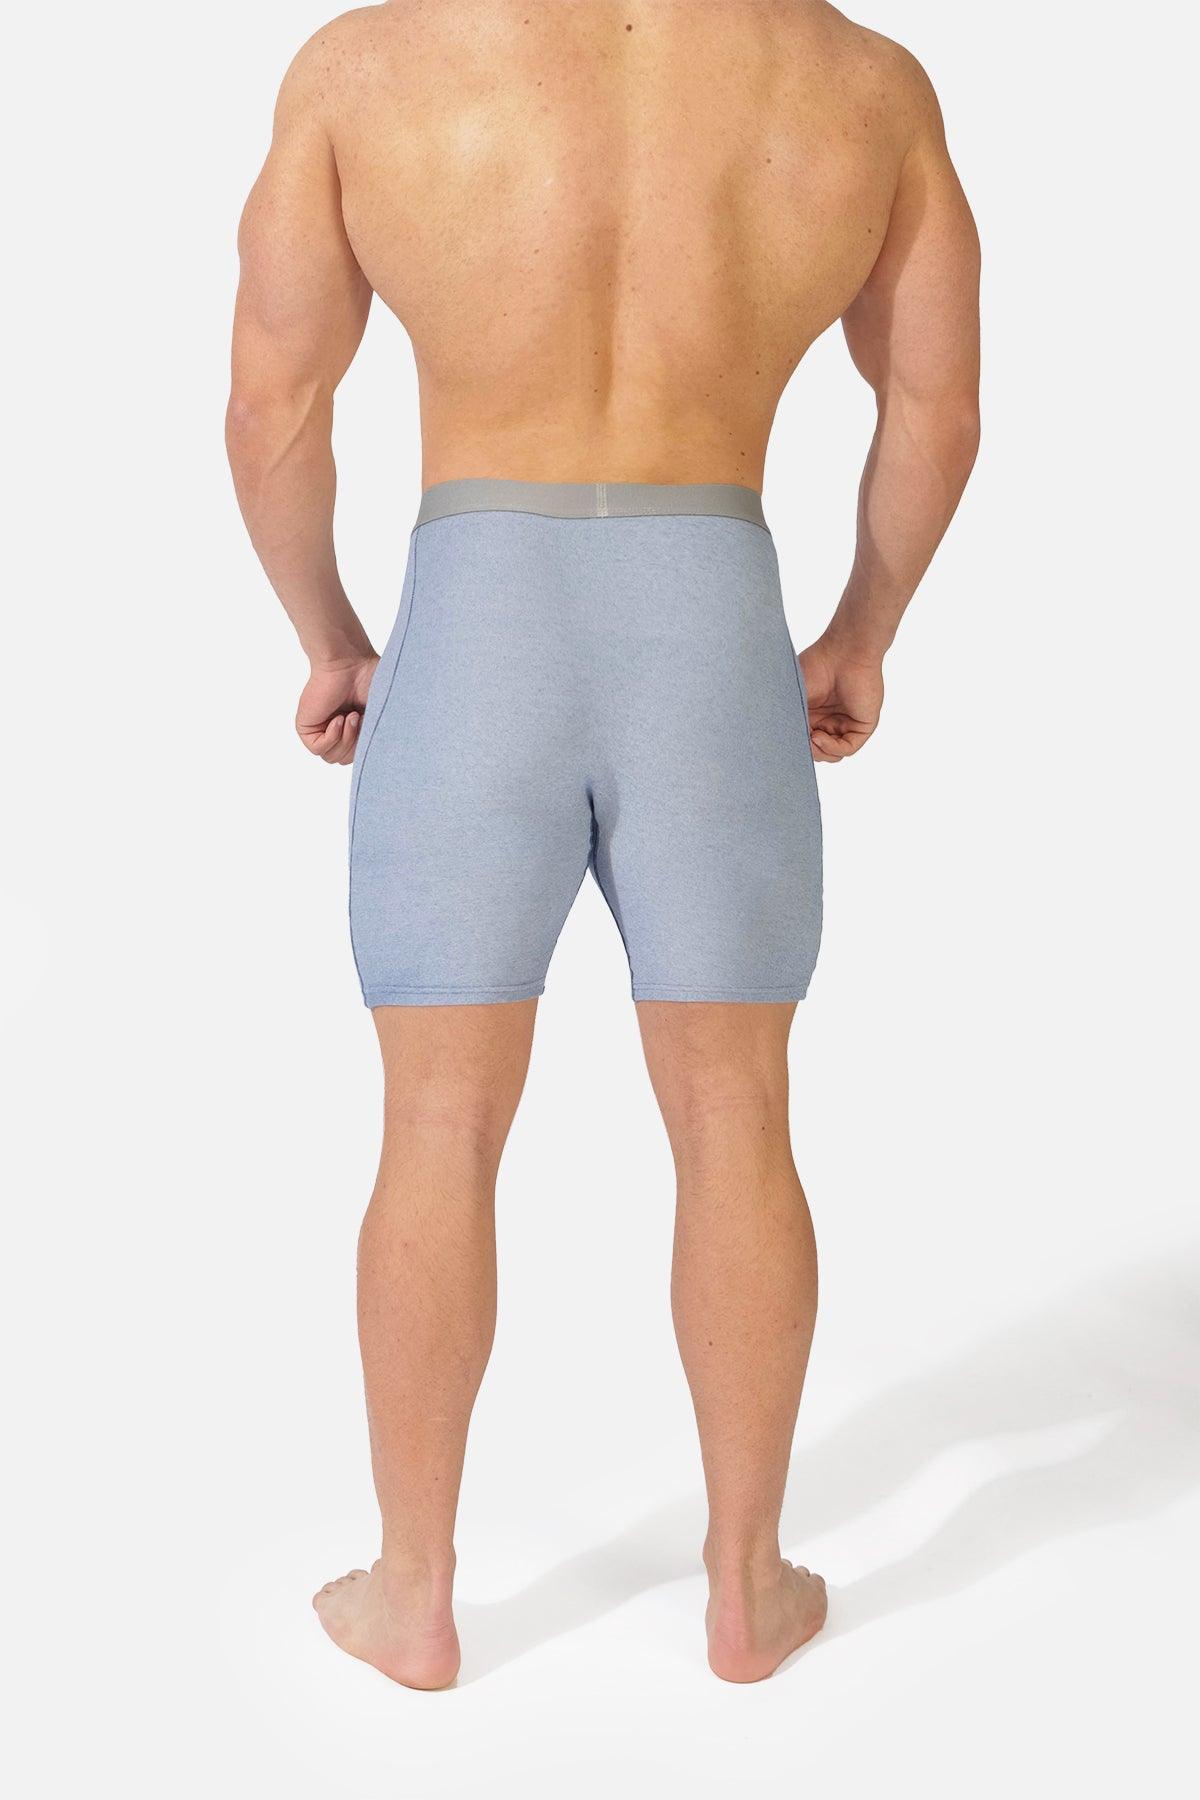 Men's Mid Length Boxer Briefs 2 Pack - Gray & Blue – Jed North